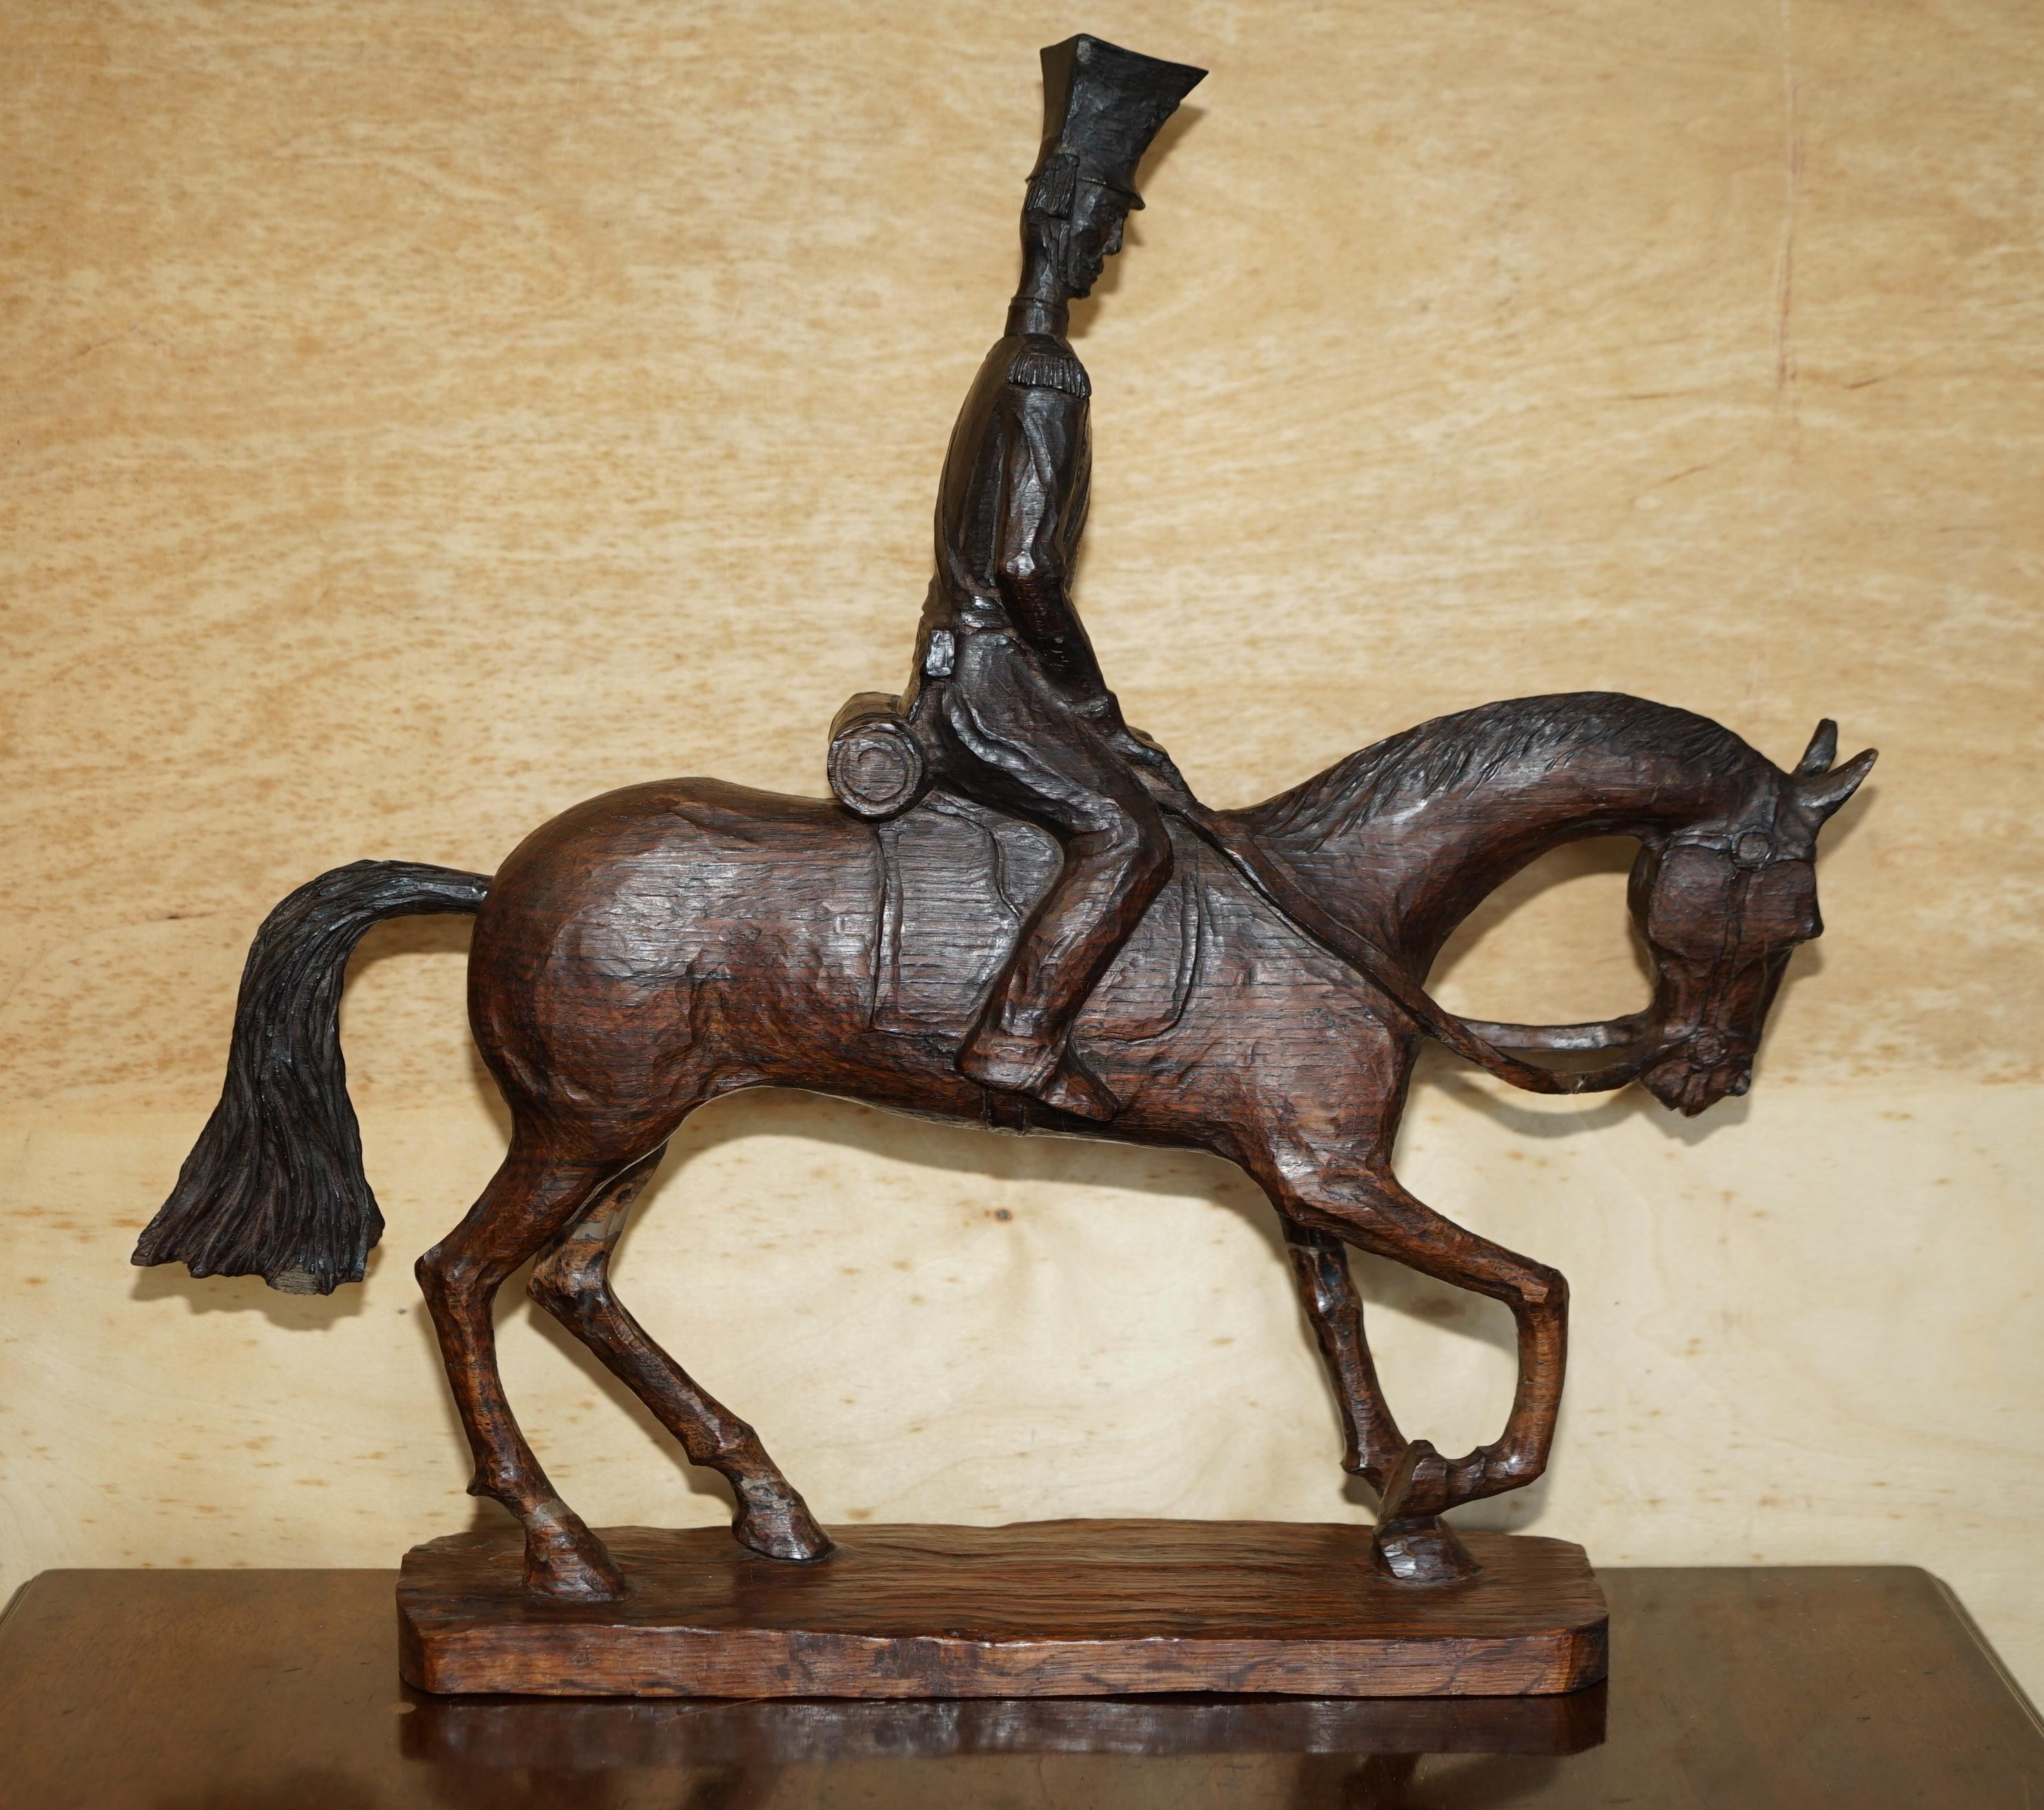 Royal House Antiques

Royal House Antiques is delighted to offer for sale this very decorative, hand carved Wakmaski signed statue of a horse with Calvary rider 

Please note the delivery fee listed is just a guide, it covers within the M25 only for